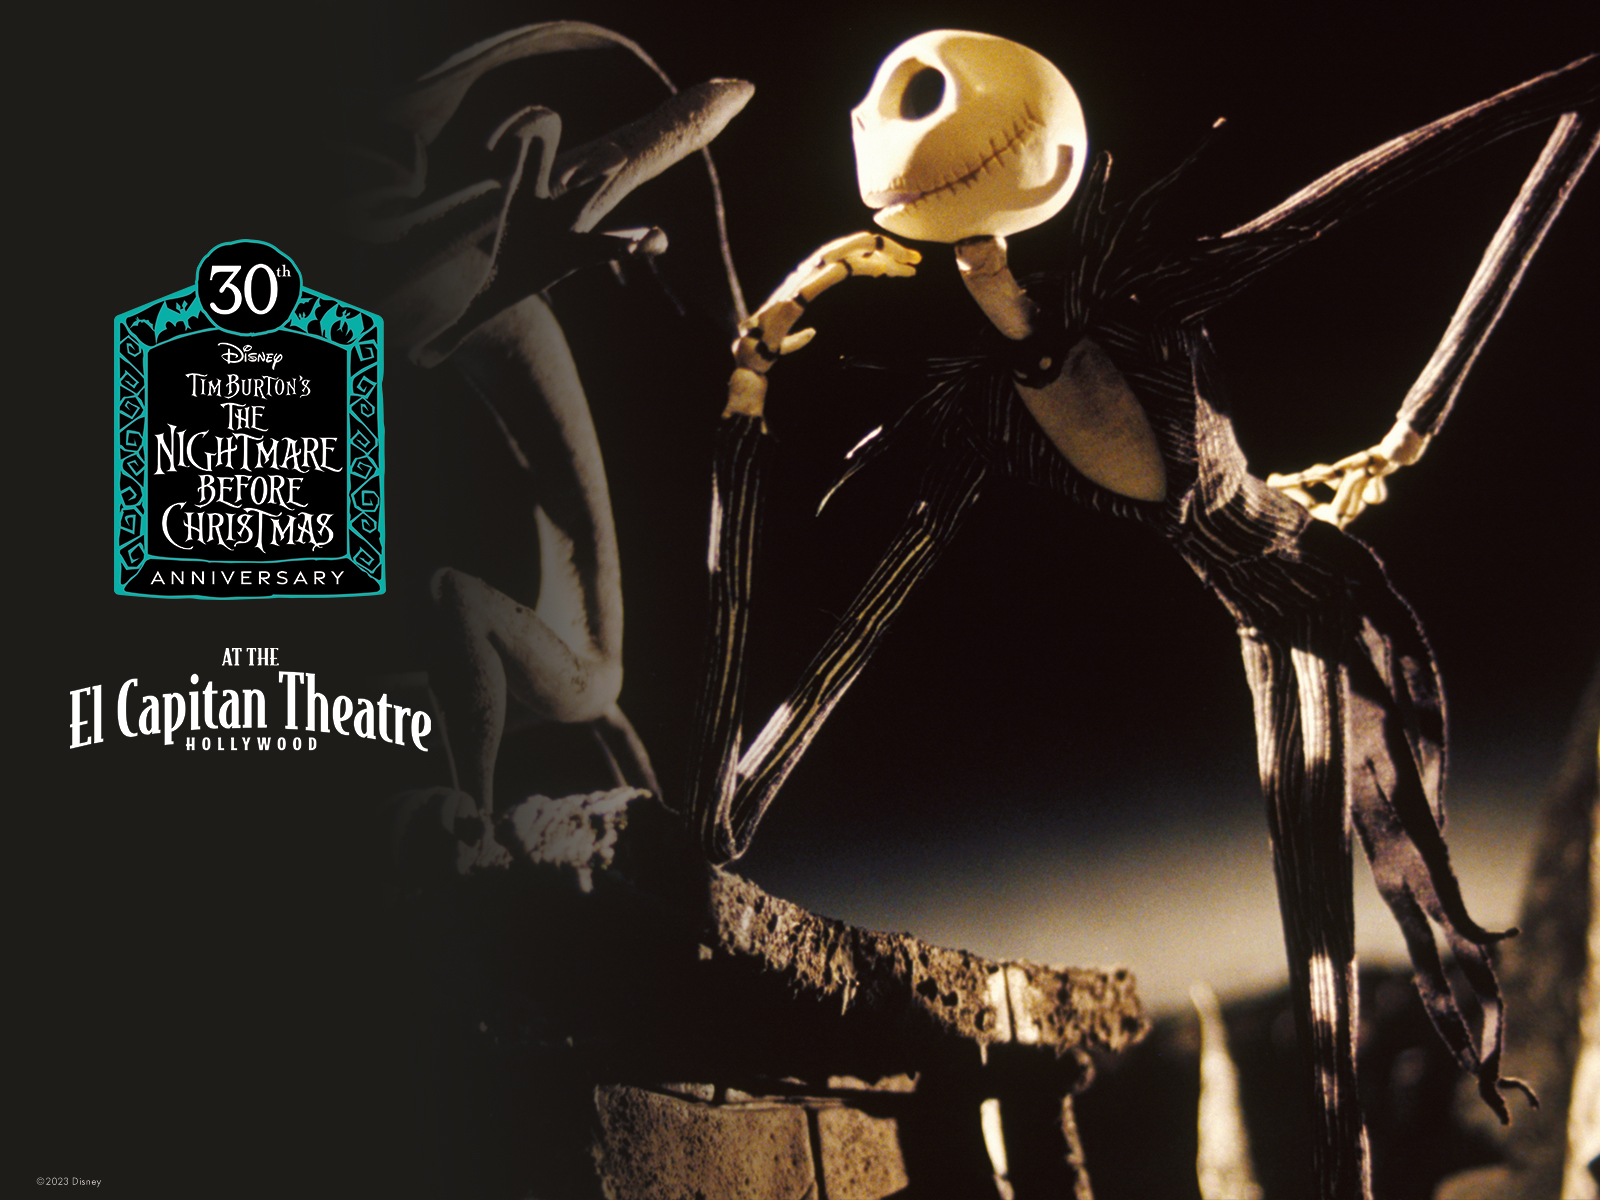 The Nightmare Before Christmas in 4D Tickets Goldstar